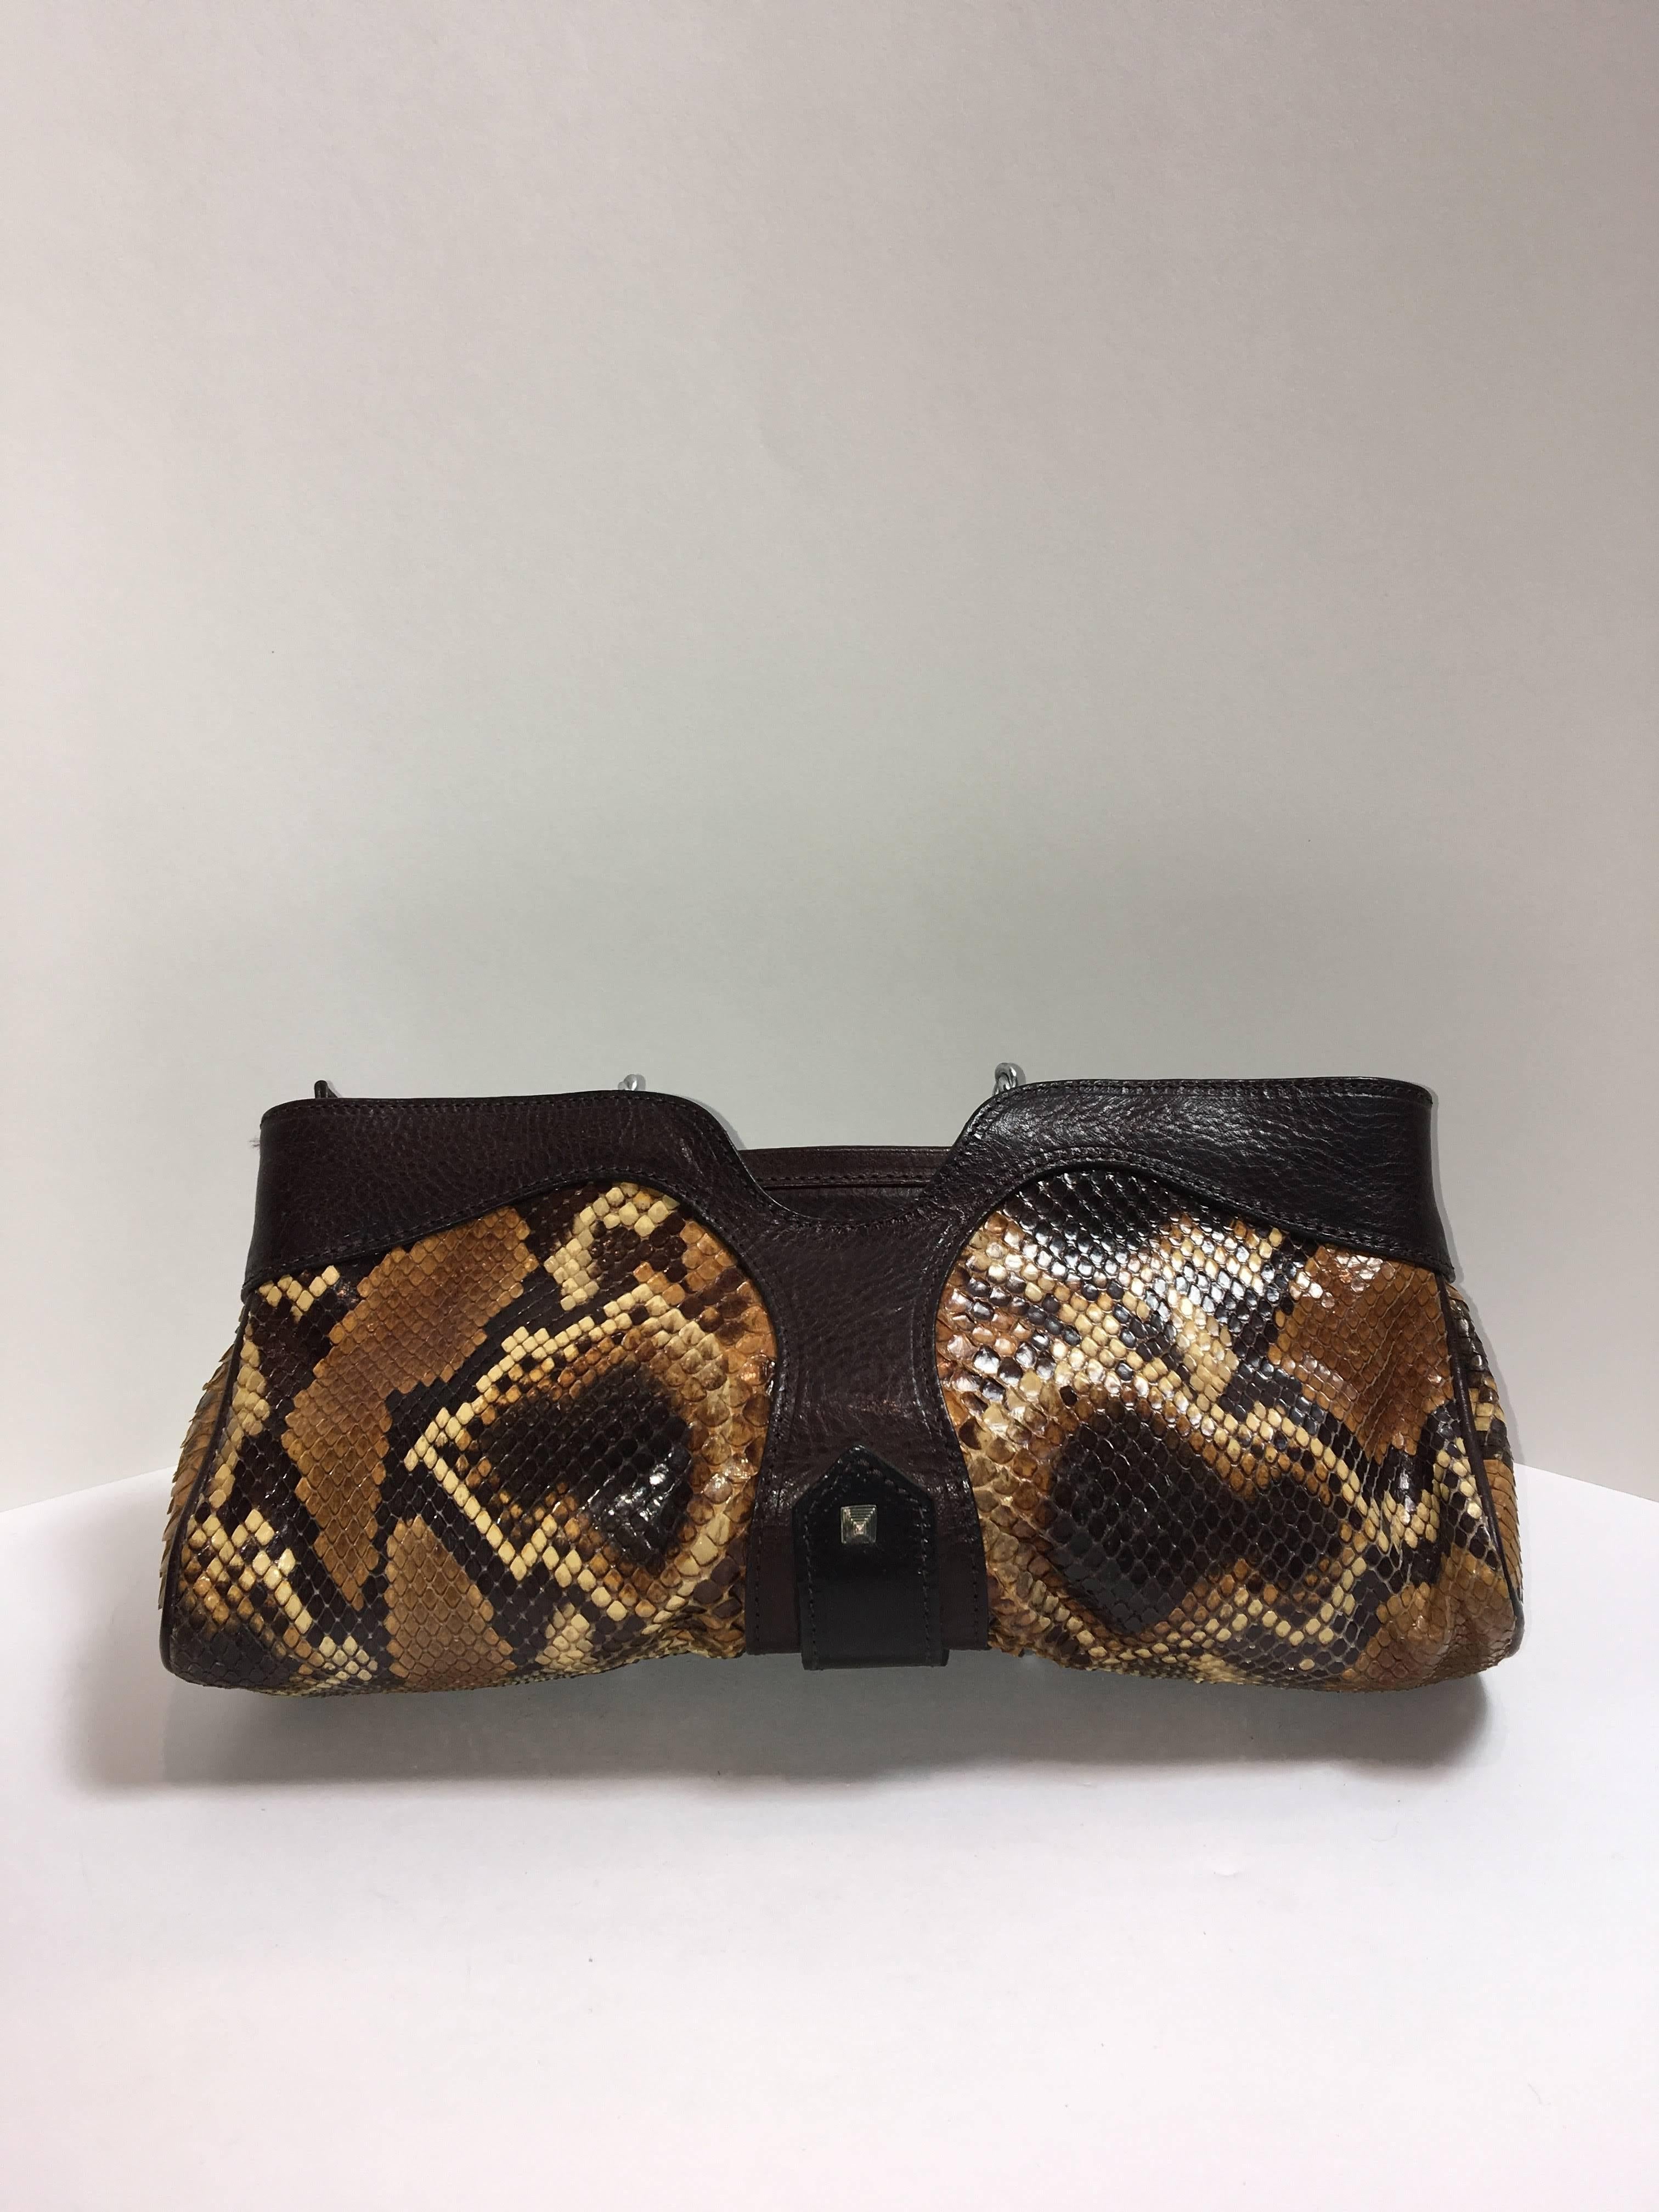 Christian Louboutin Brown Python Clutch/ Shoulder bag with leather trim. 